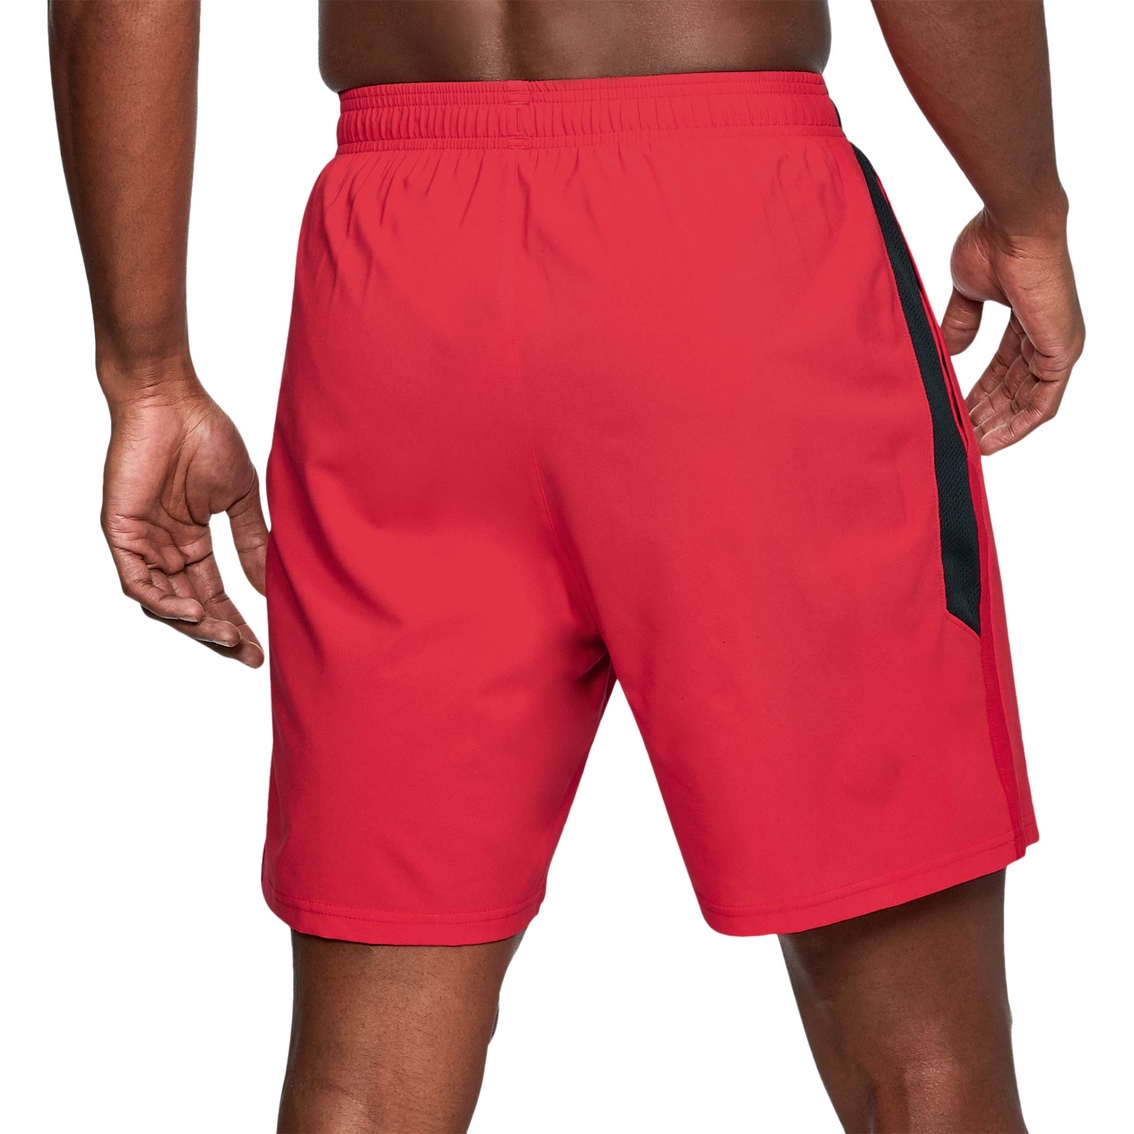 Under Armour Men's Launch Stretch Woven 7 in. Shorts - Image 2 of 3